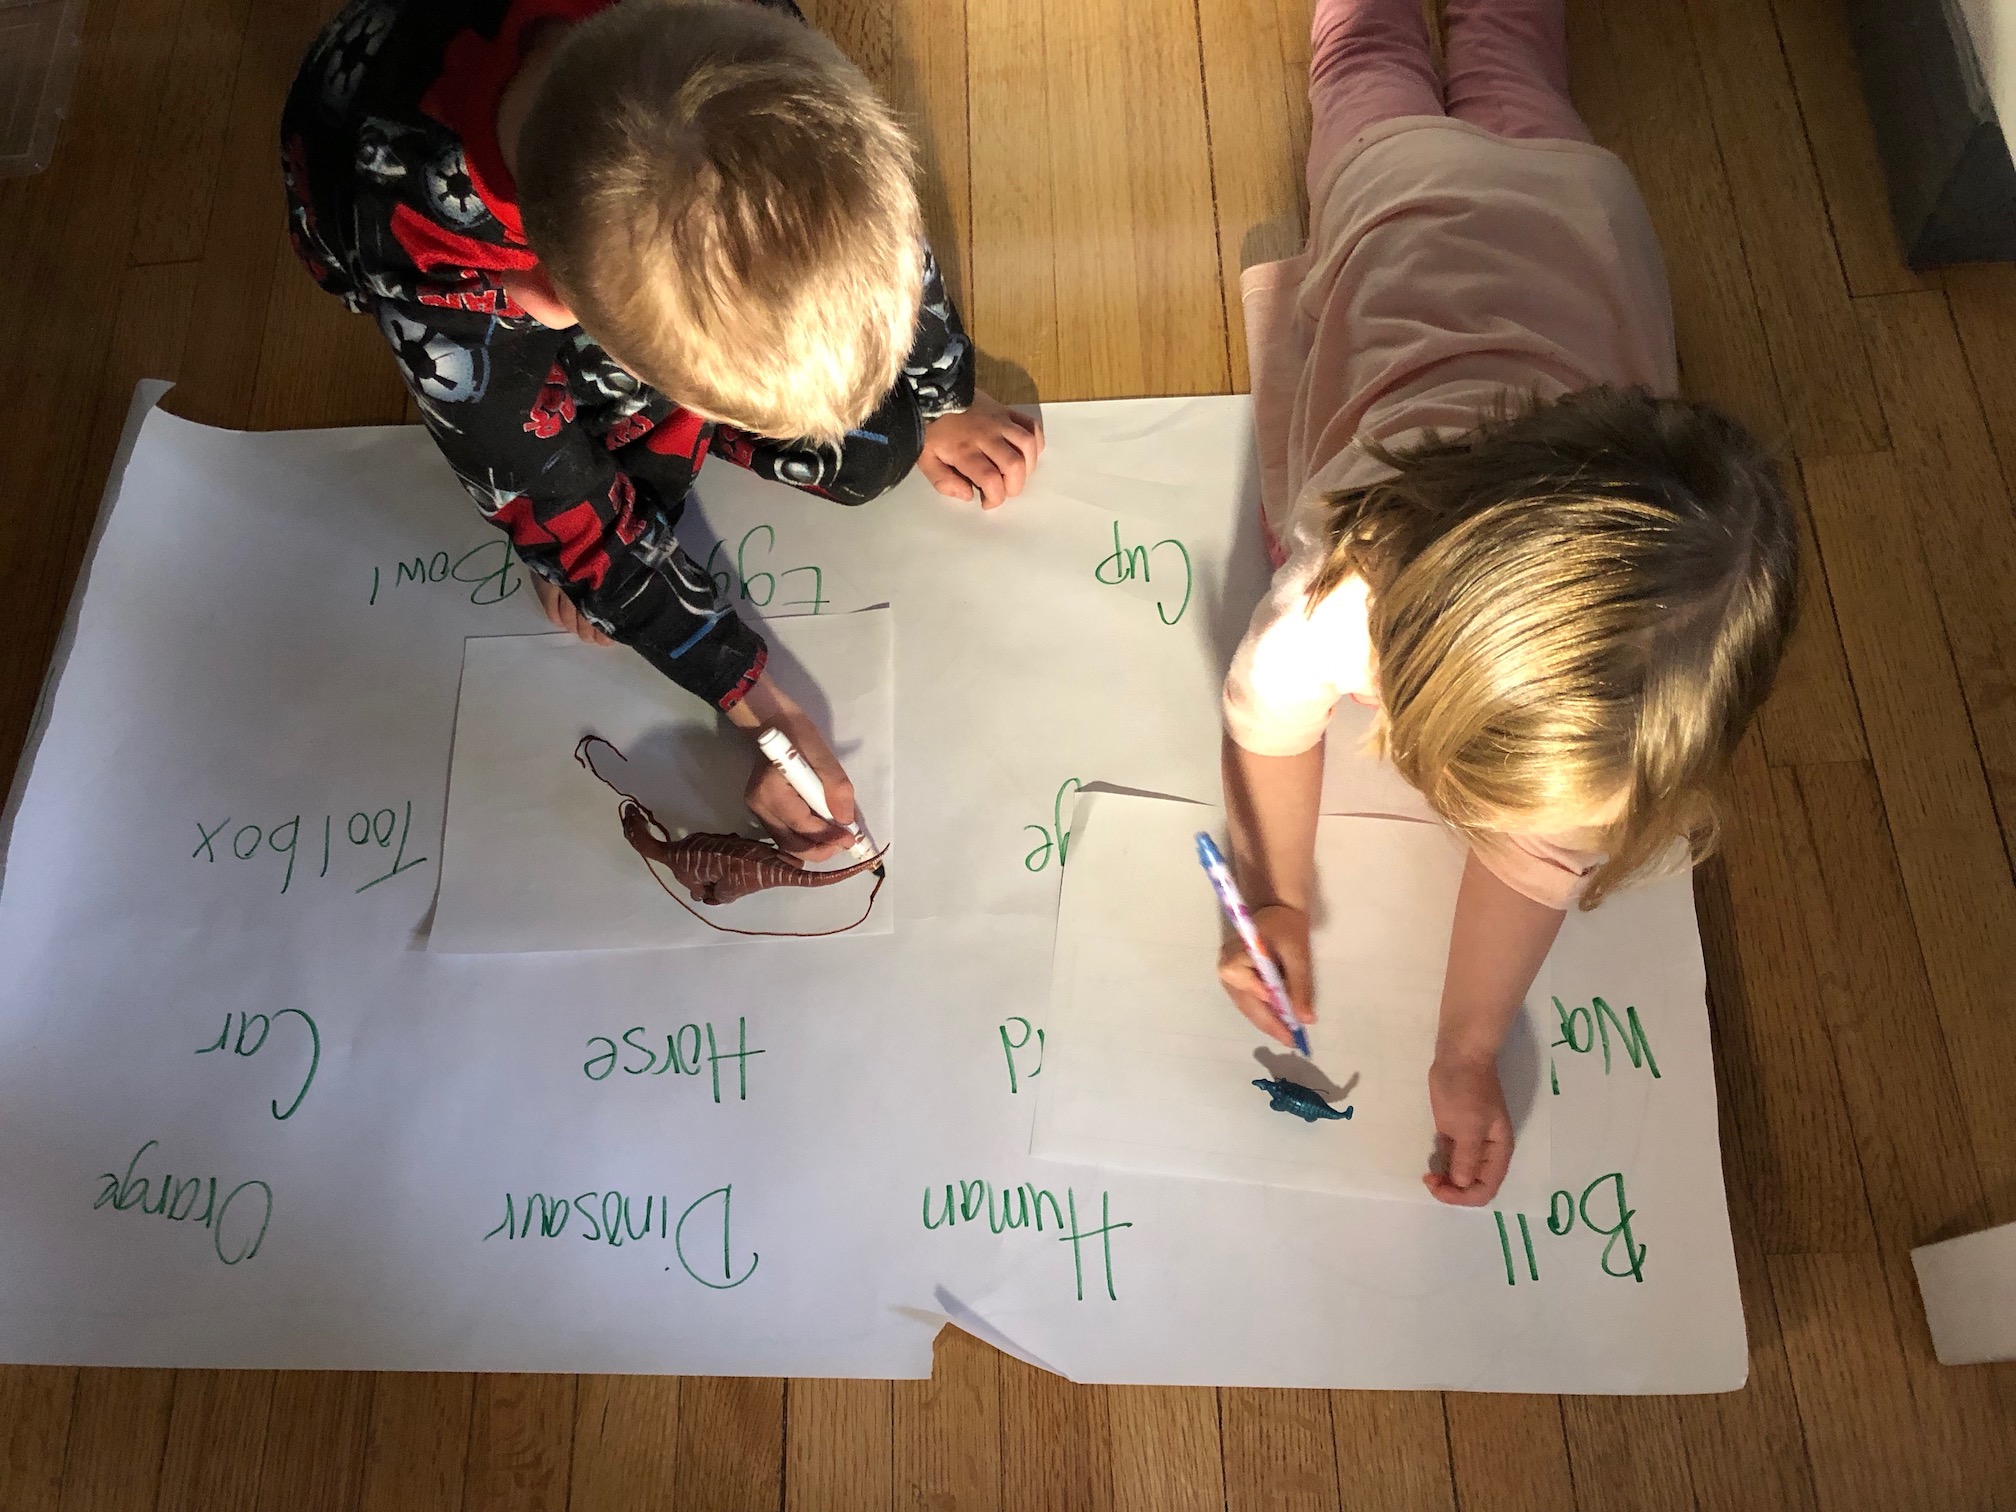 Two young children are seen drawing on white pieces of paper. Each paper has a plastic dinosaur, with a light casting a shadow on the paper.